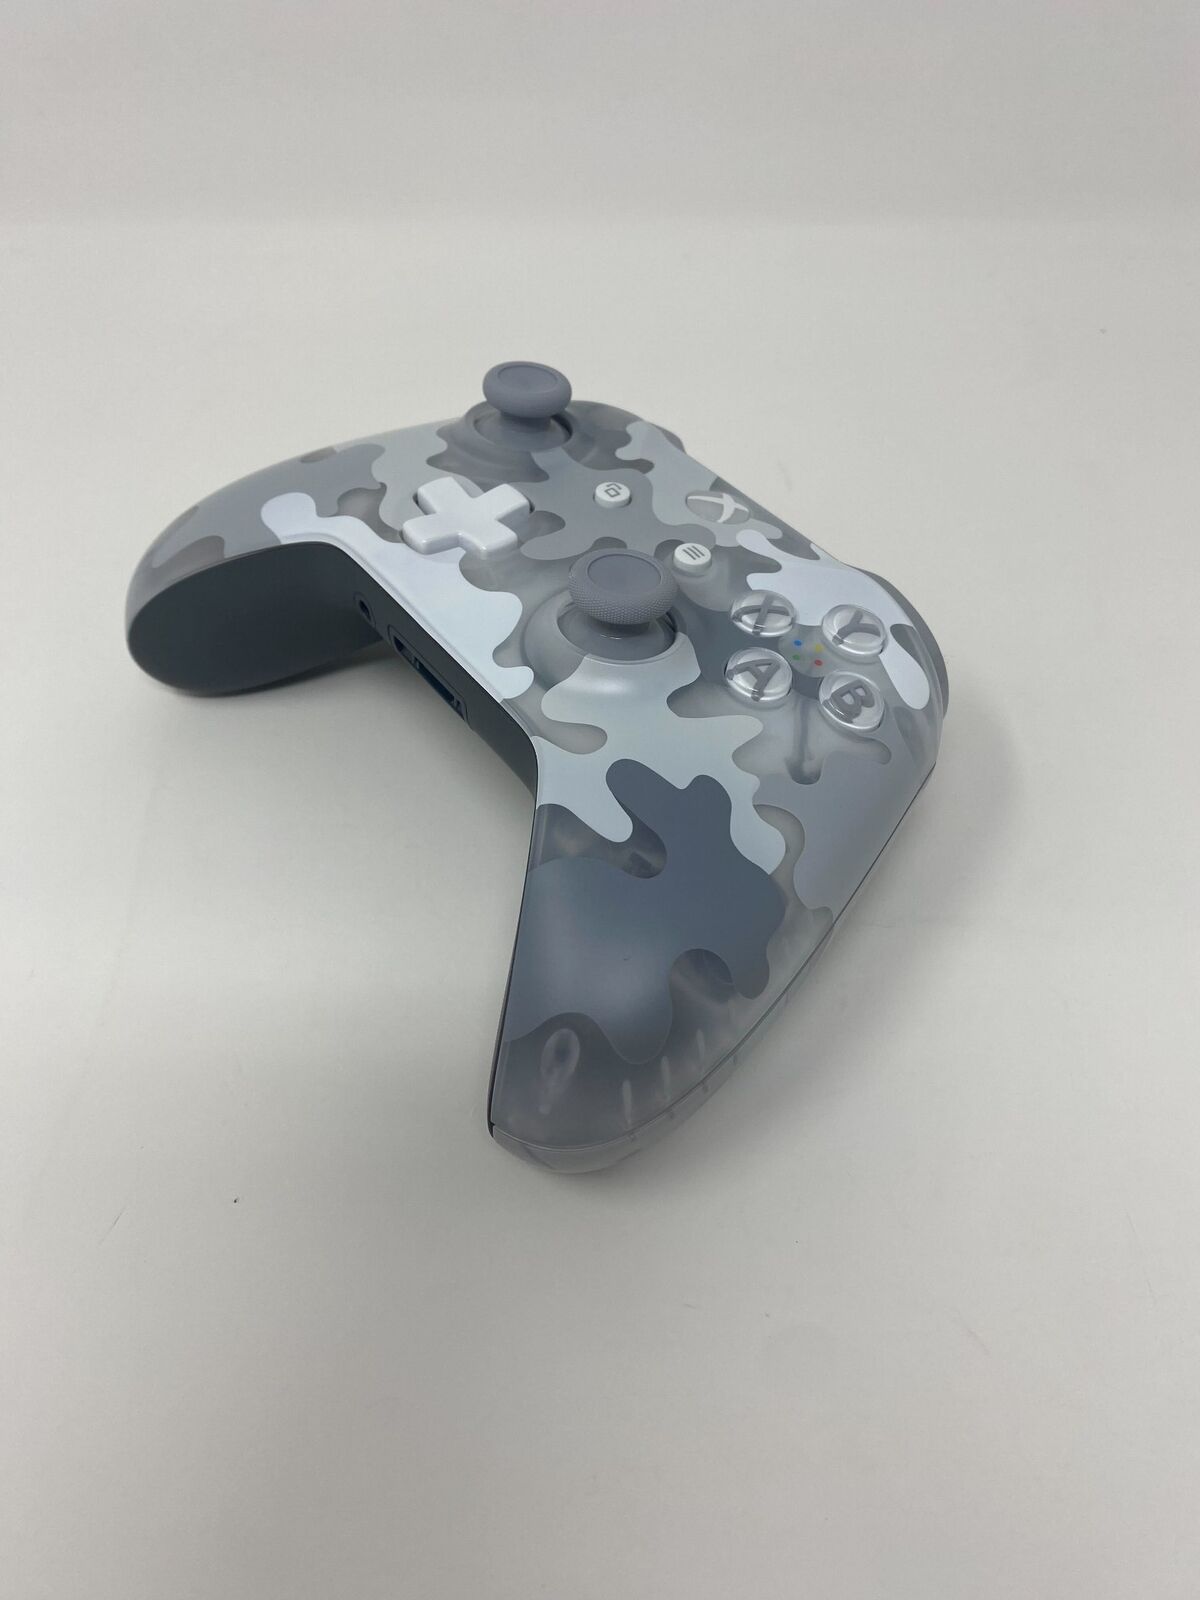 Microsoft Xbox One Wireless Gaming Controller Arctic Camo Special